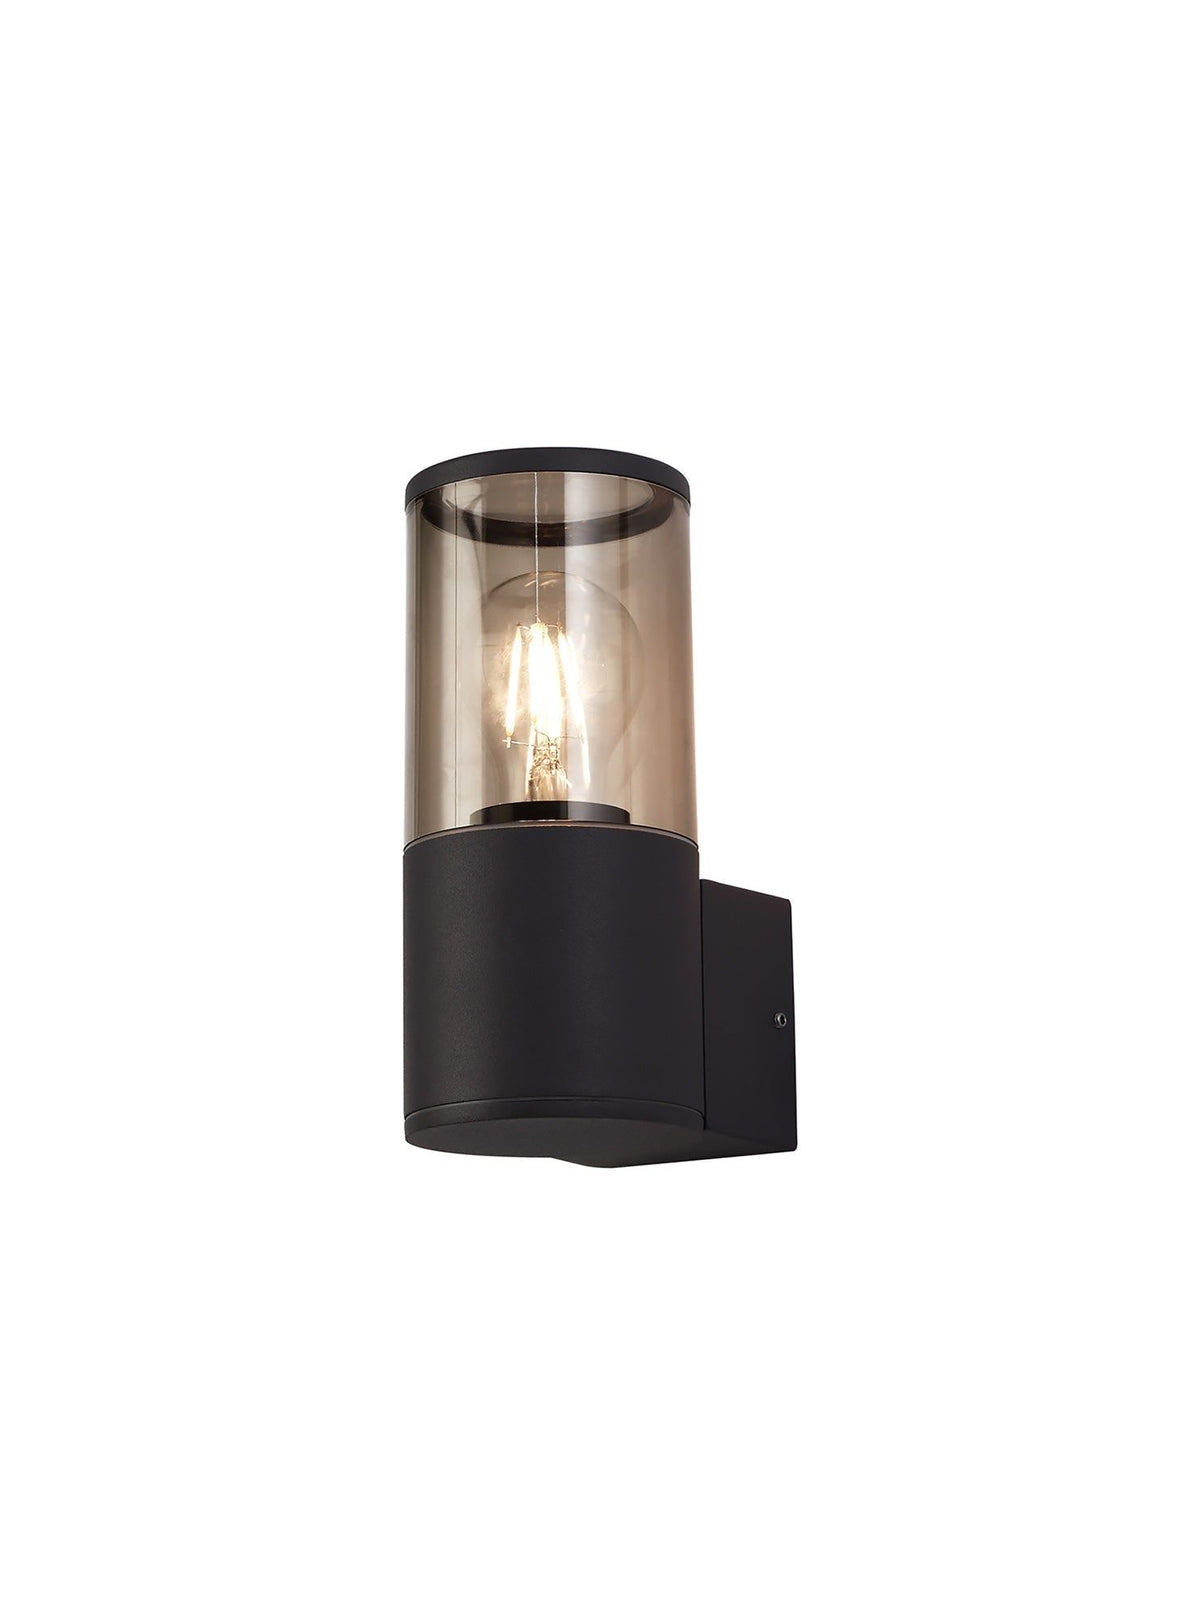 Taiminer Wall Lamp 1/2 x E27, IP54, Anthracite, 2yrs Warranty